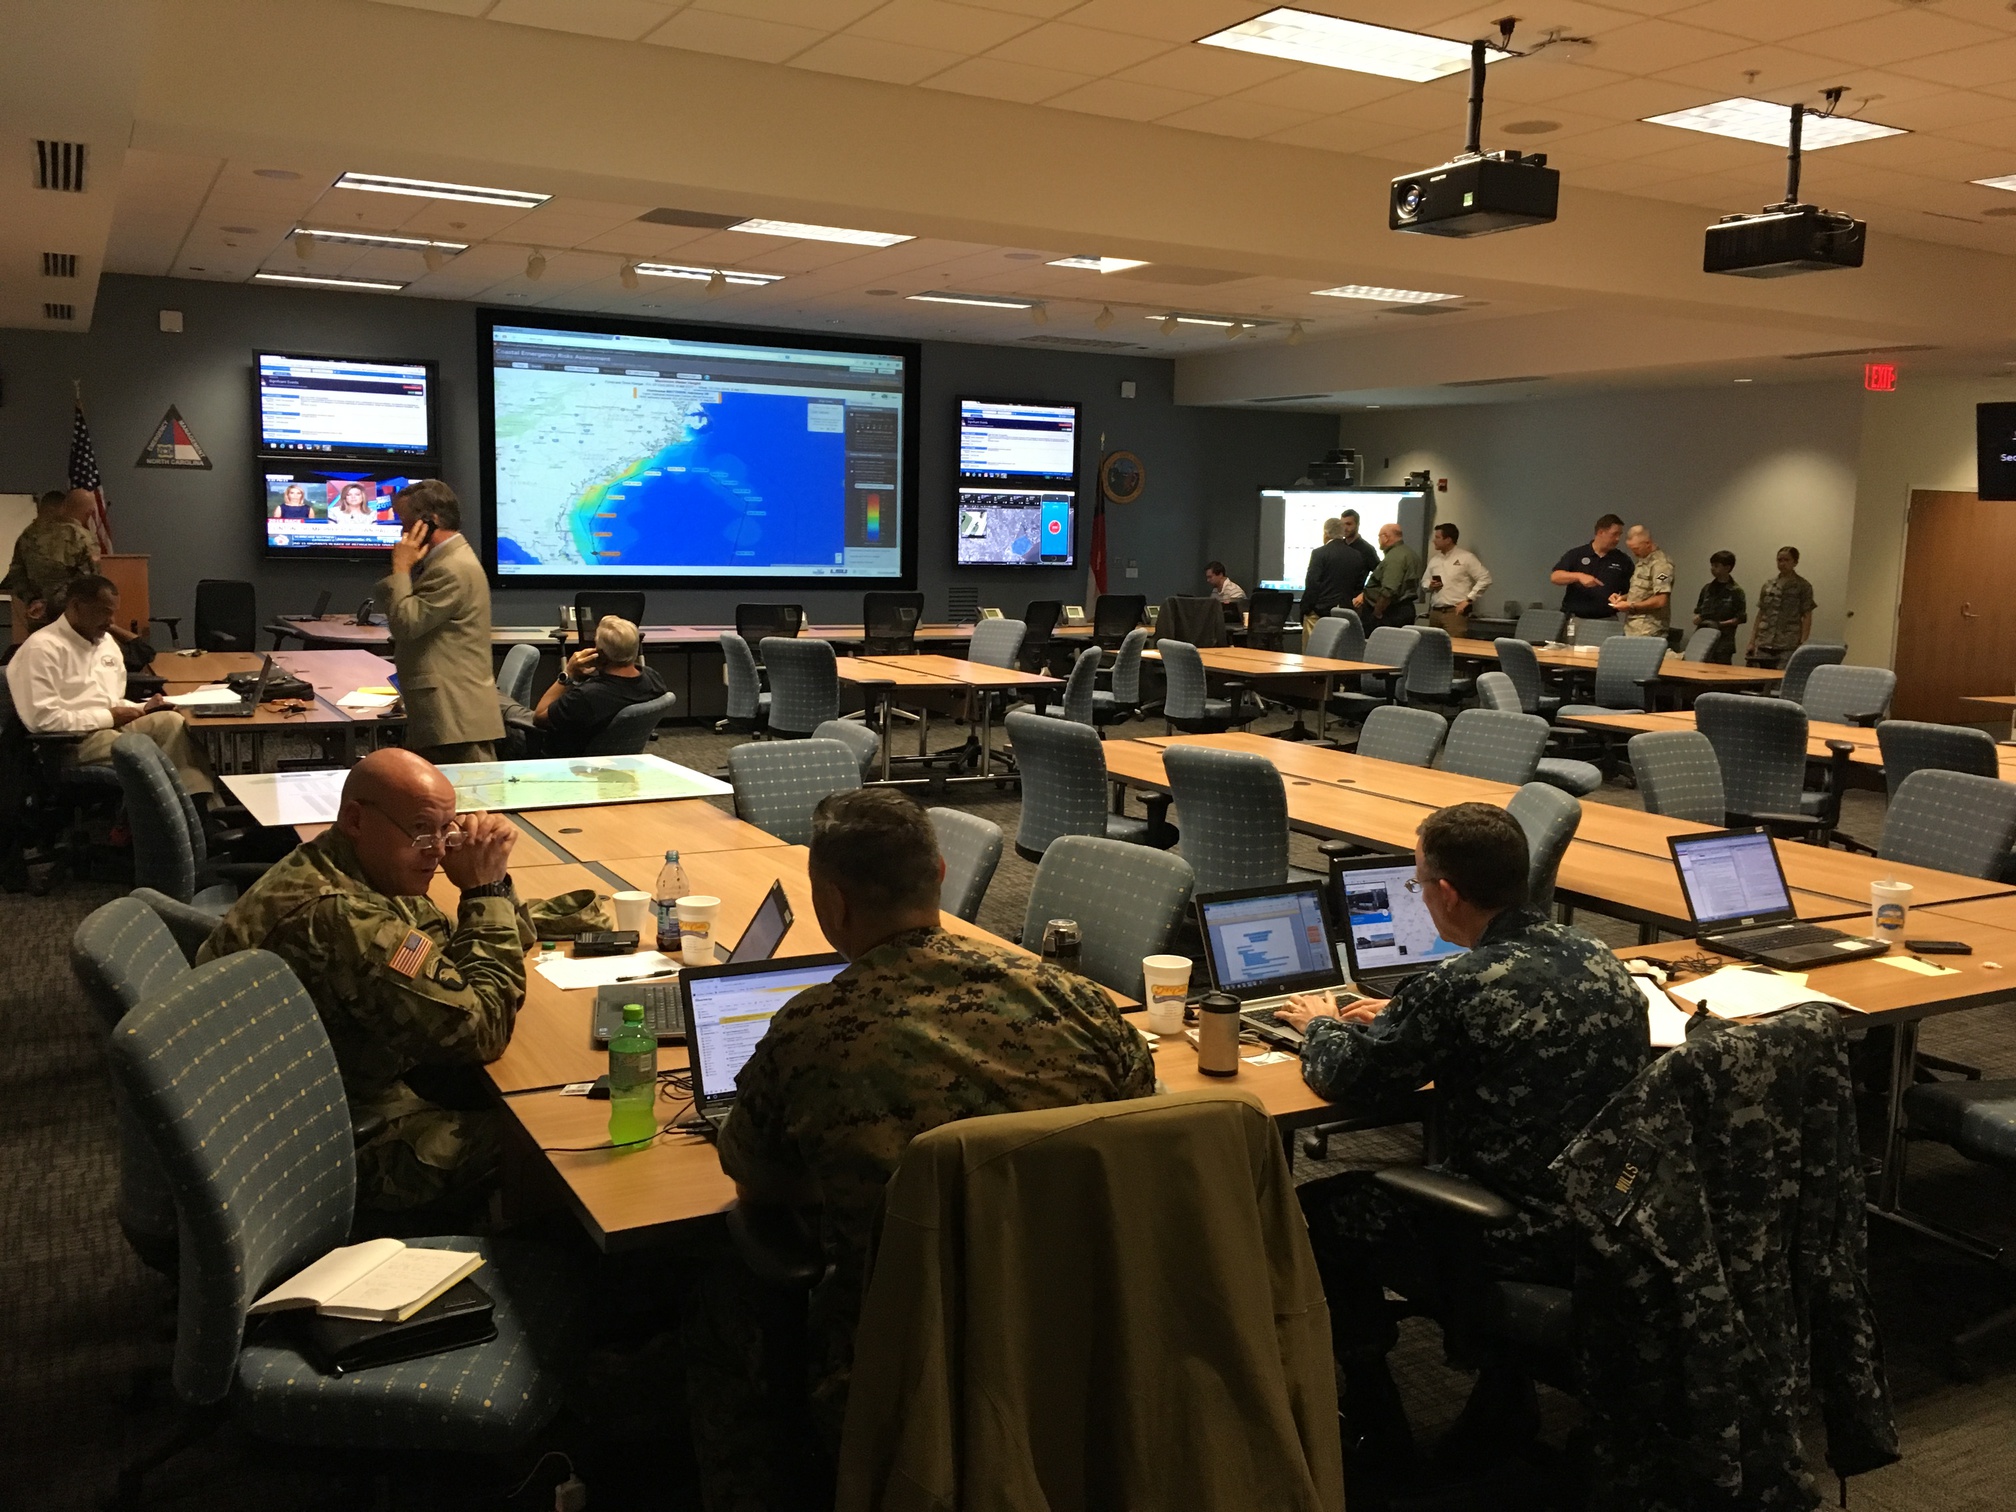 The CERA website is used during Hurricane Matthew preparations at the NCEM Emergency Operations Center.